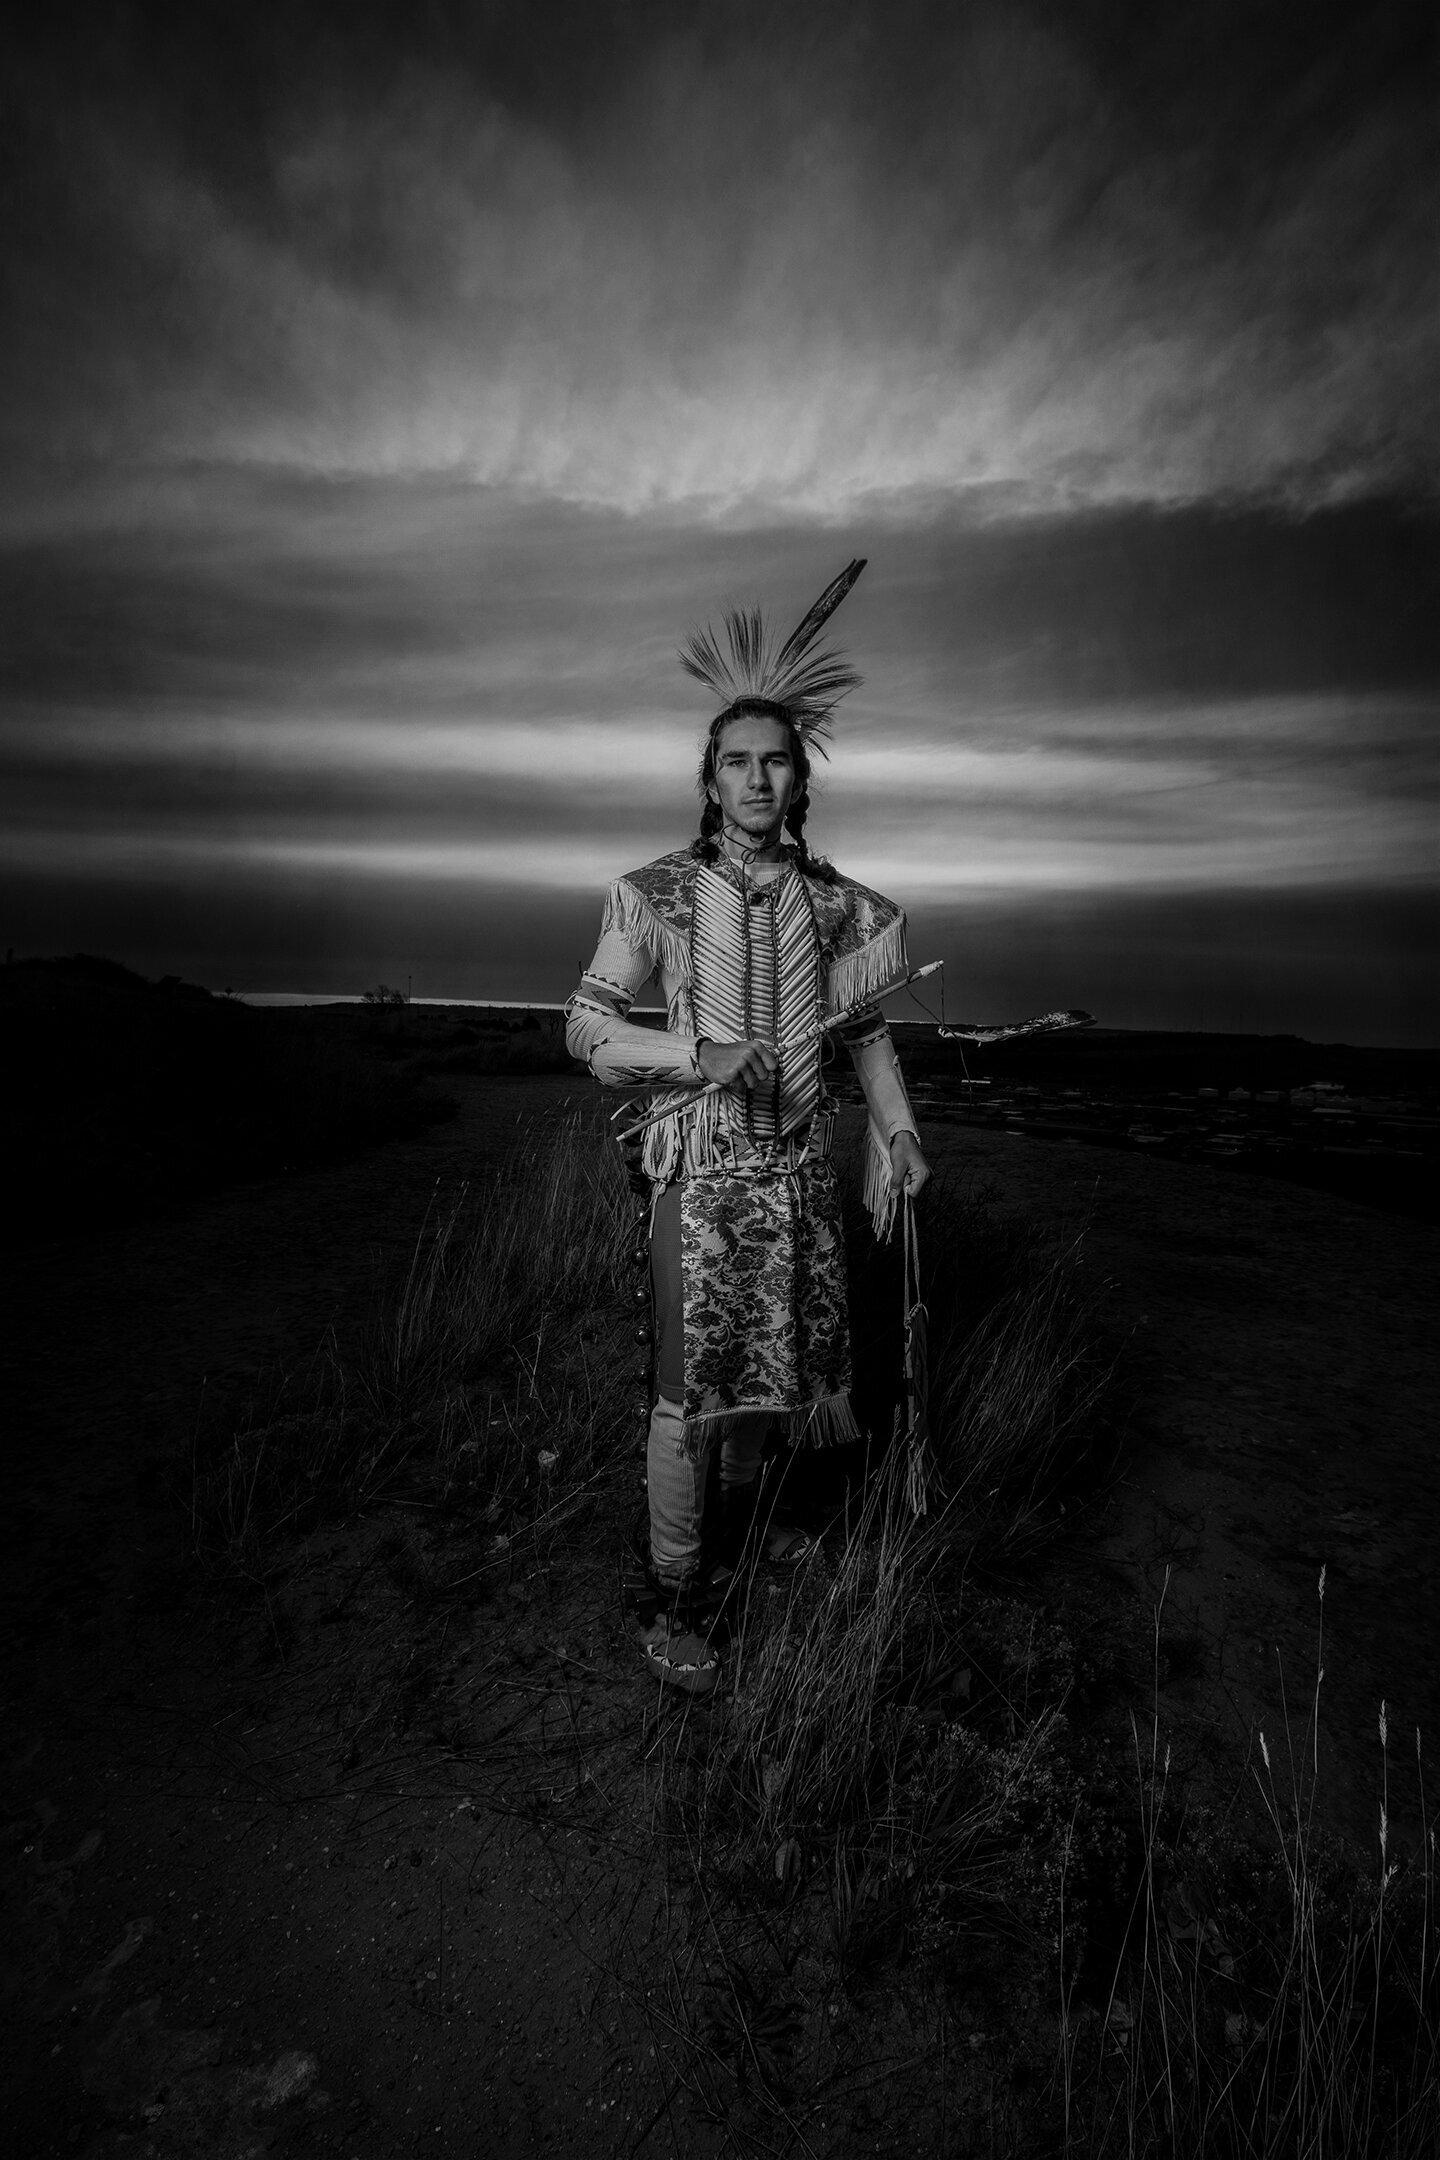 Black and white picture of Native American in tradition regalia. Senior pictures on the rims in Billings MT. Feathers, headdress, beading. Prairie grass.